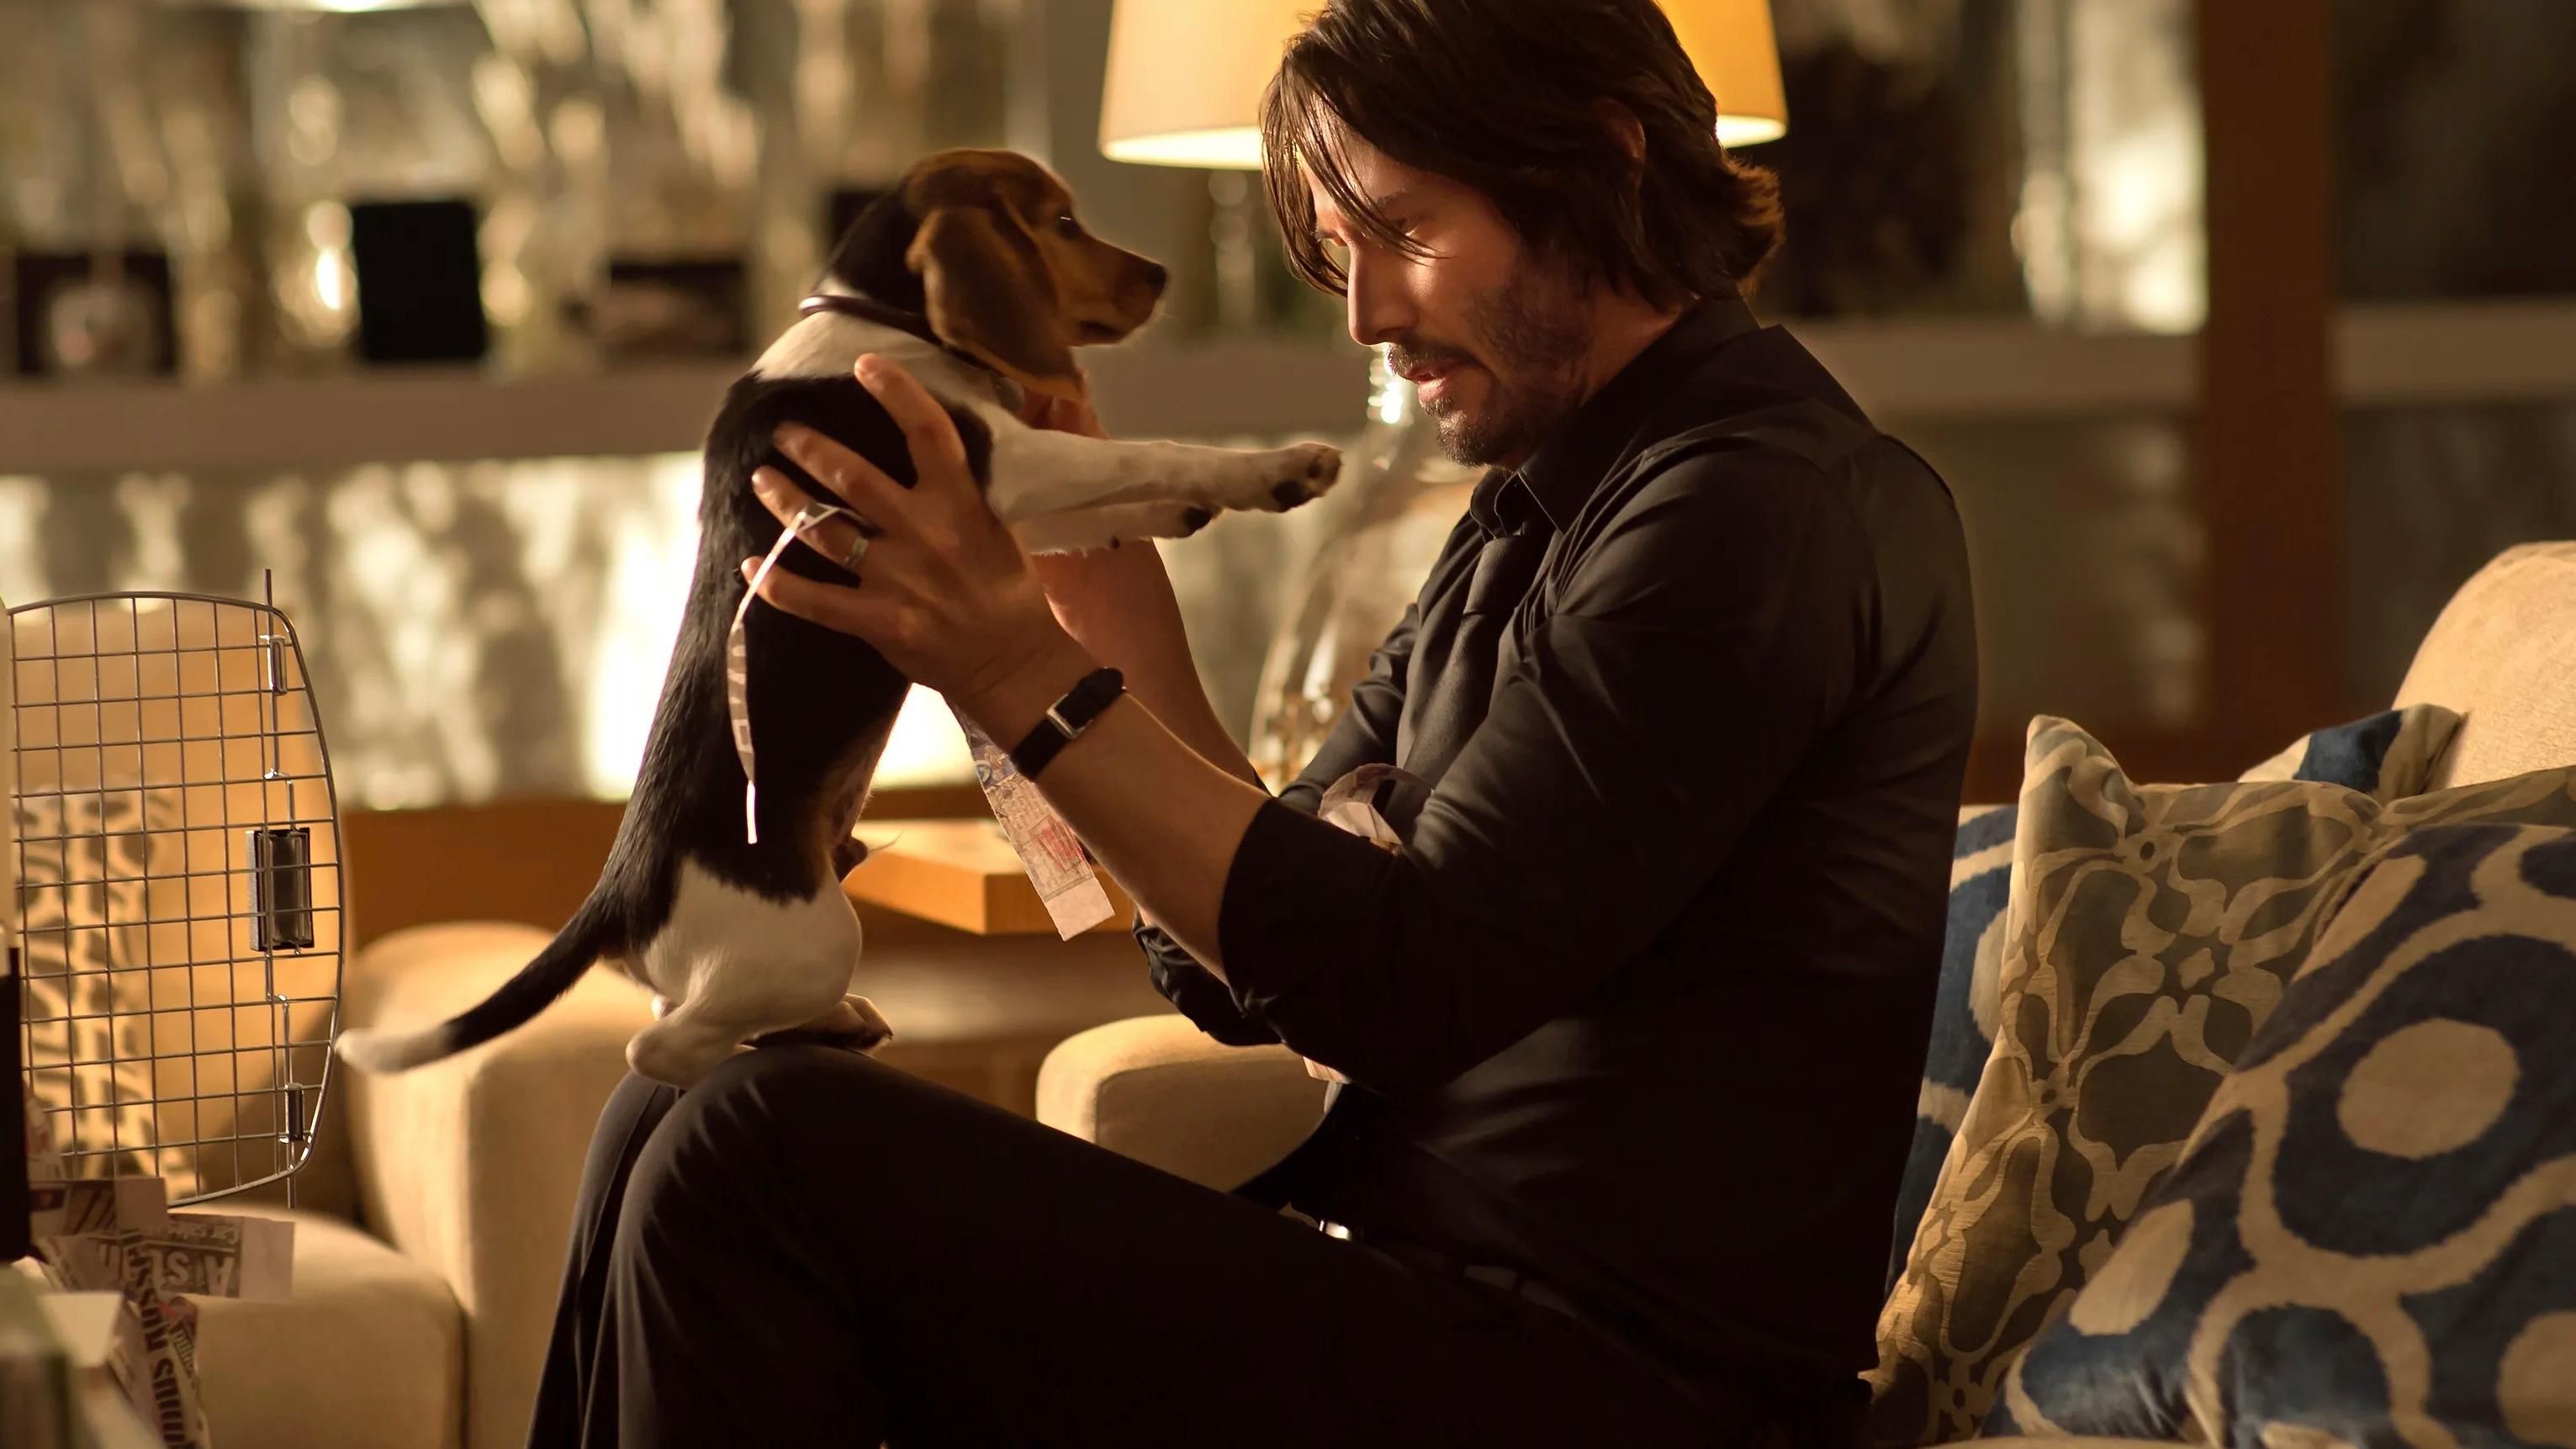 John wick holding his puppy in the first film.